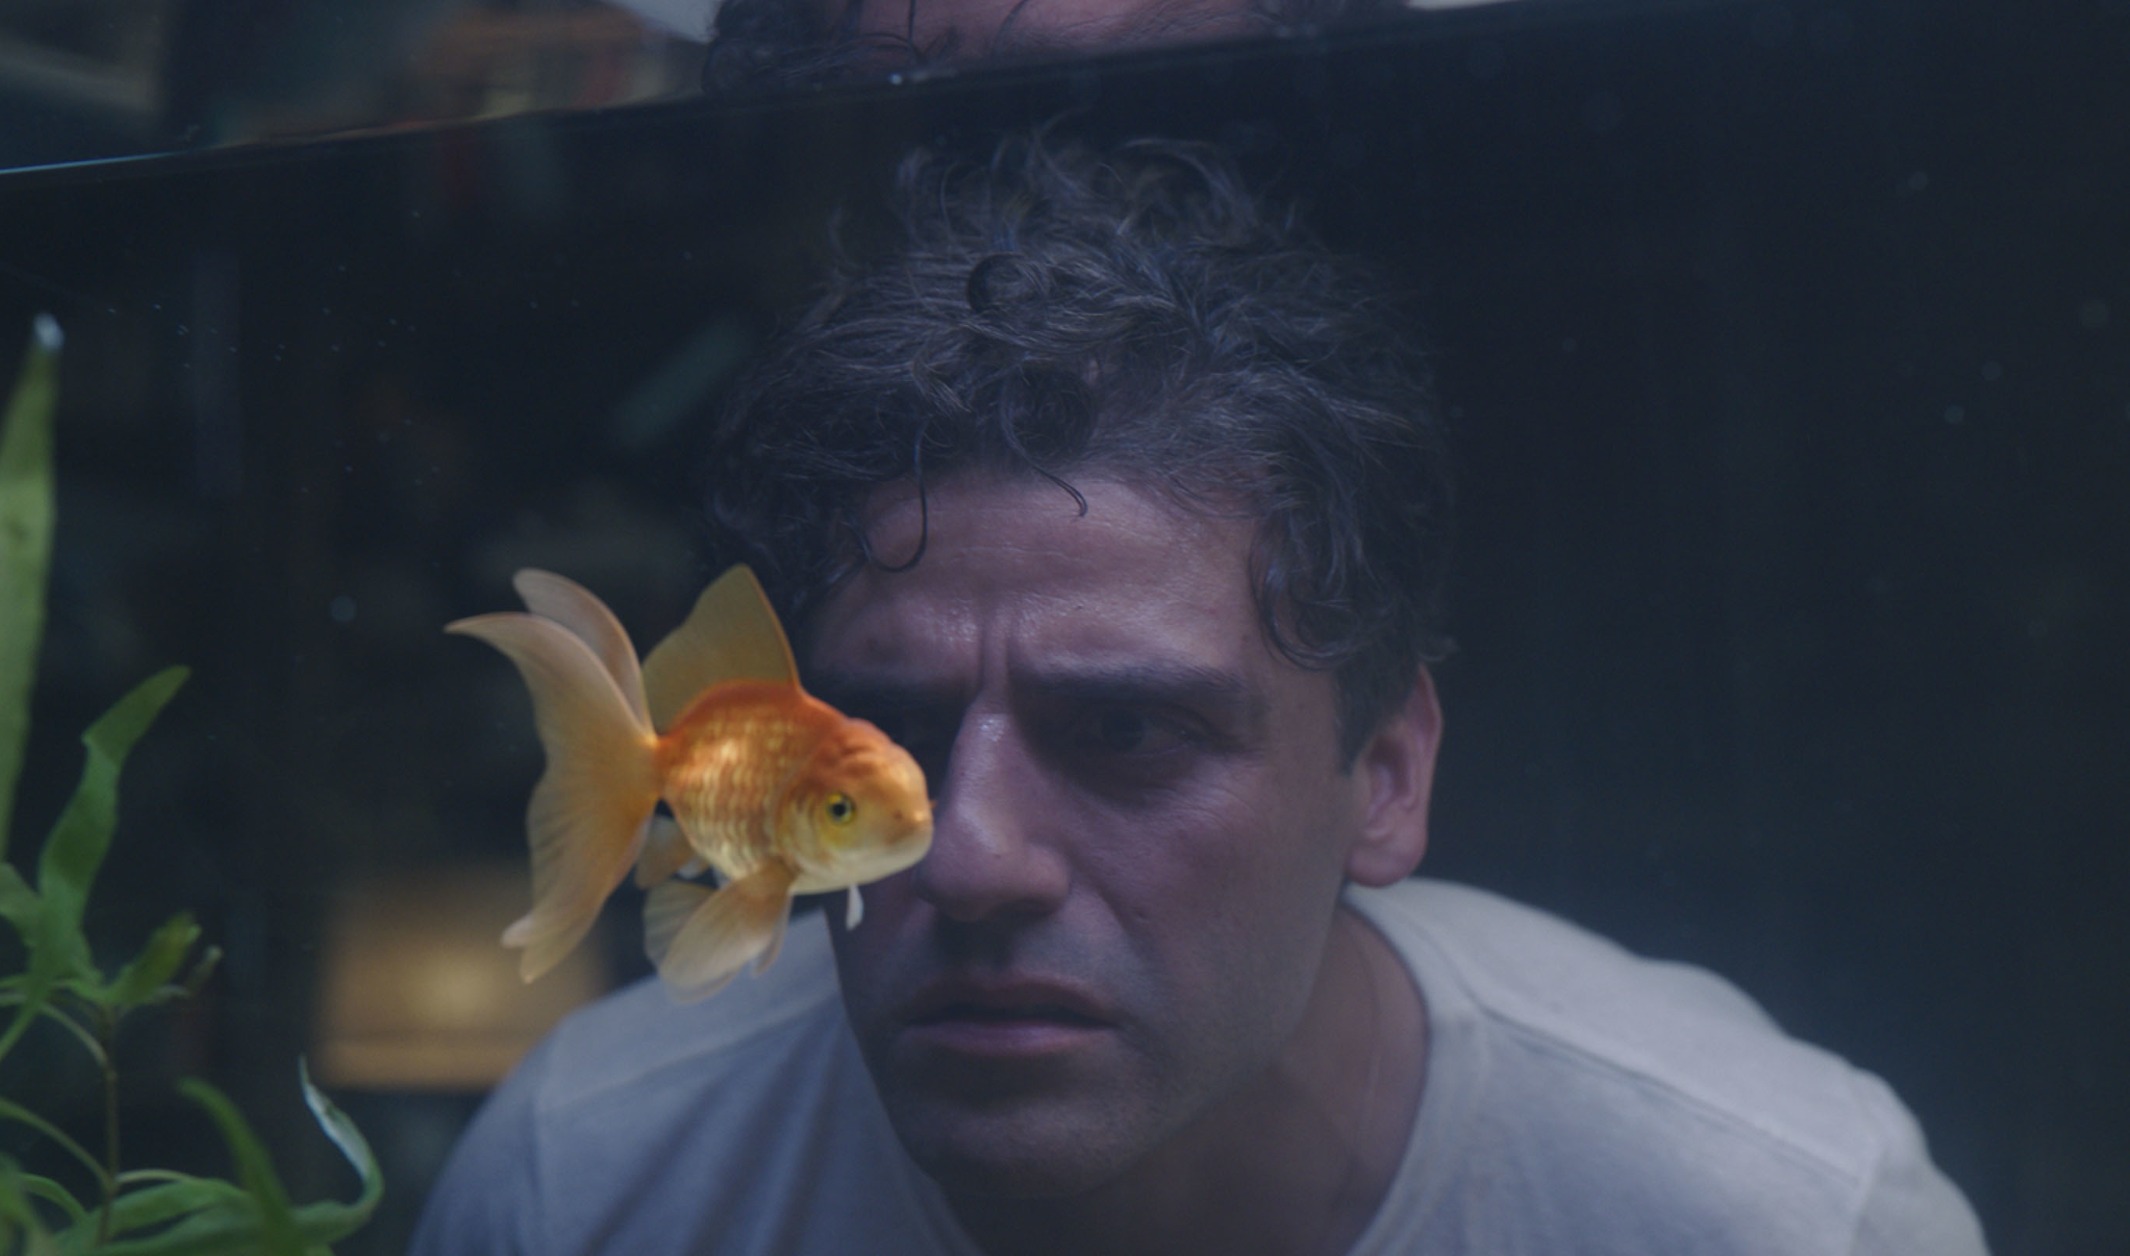 Oscar Isaac as Steven Grant in 'Moon Knight' Episode 1. He's wearing a white T-shirt and staring at his goldfish, looking perplexed.